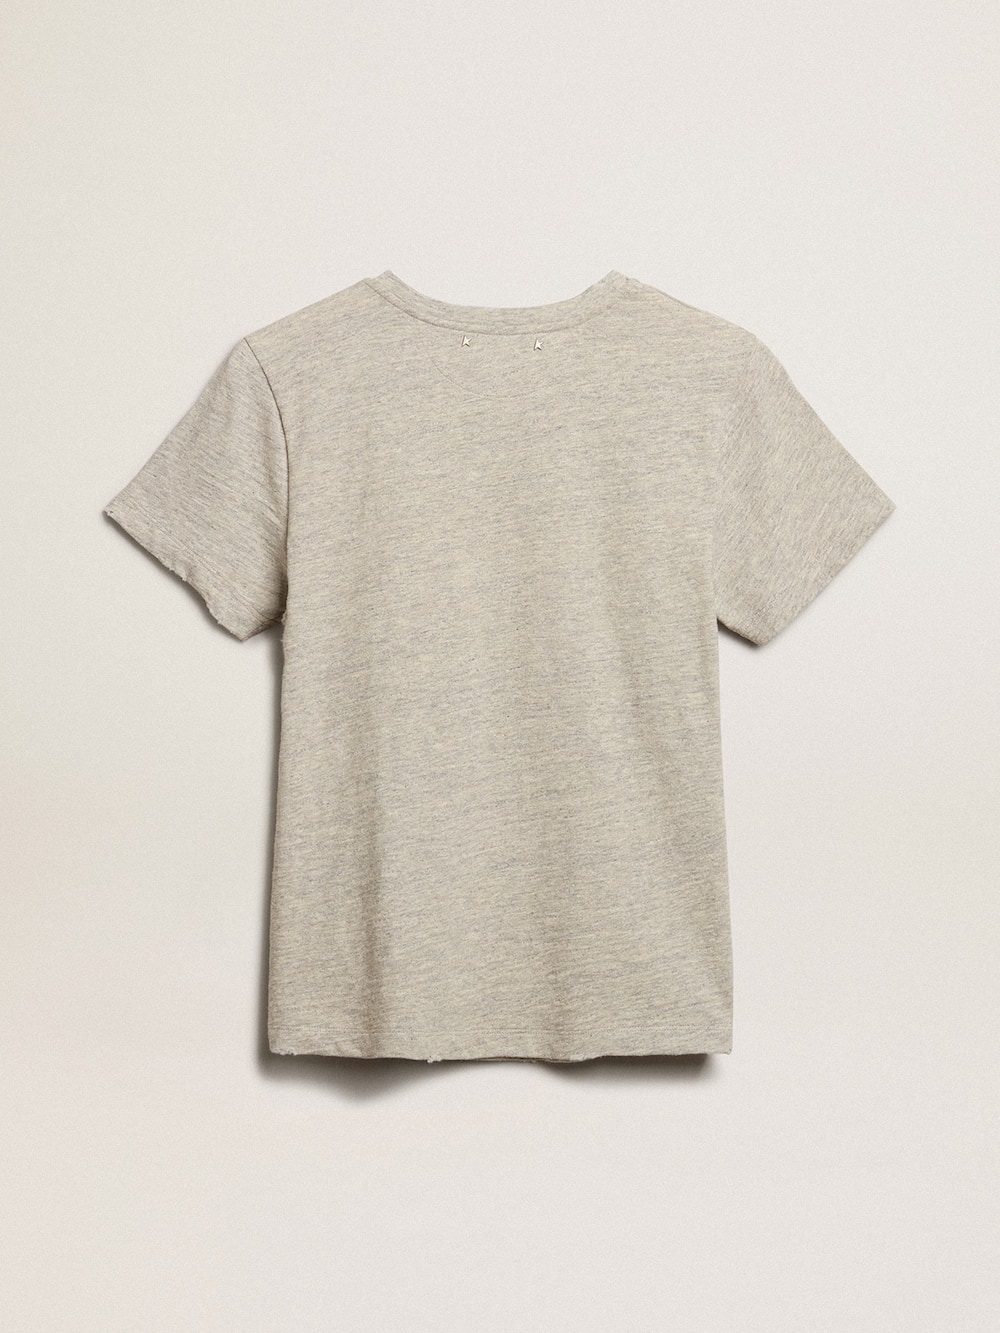 Golden Goose - Women’s gray melange cotton T-shirt with embroidered lettering in 